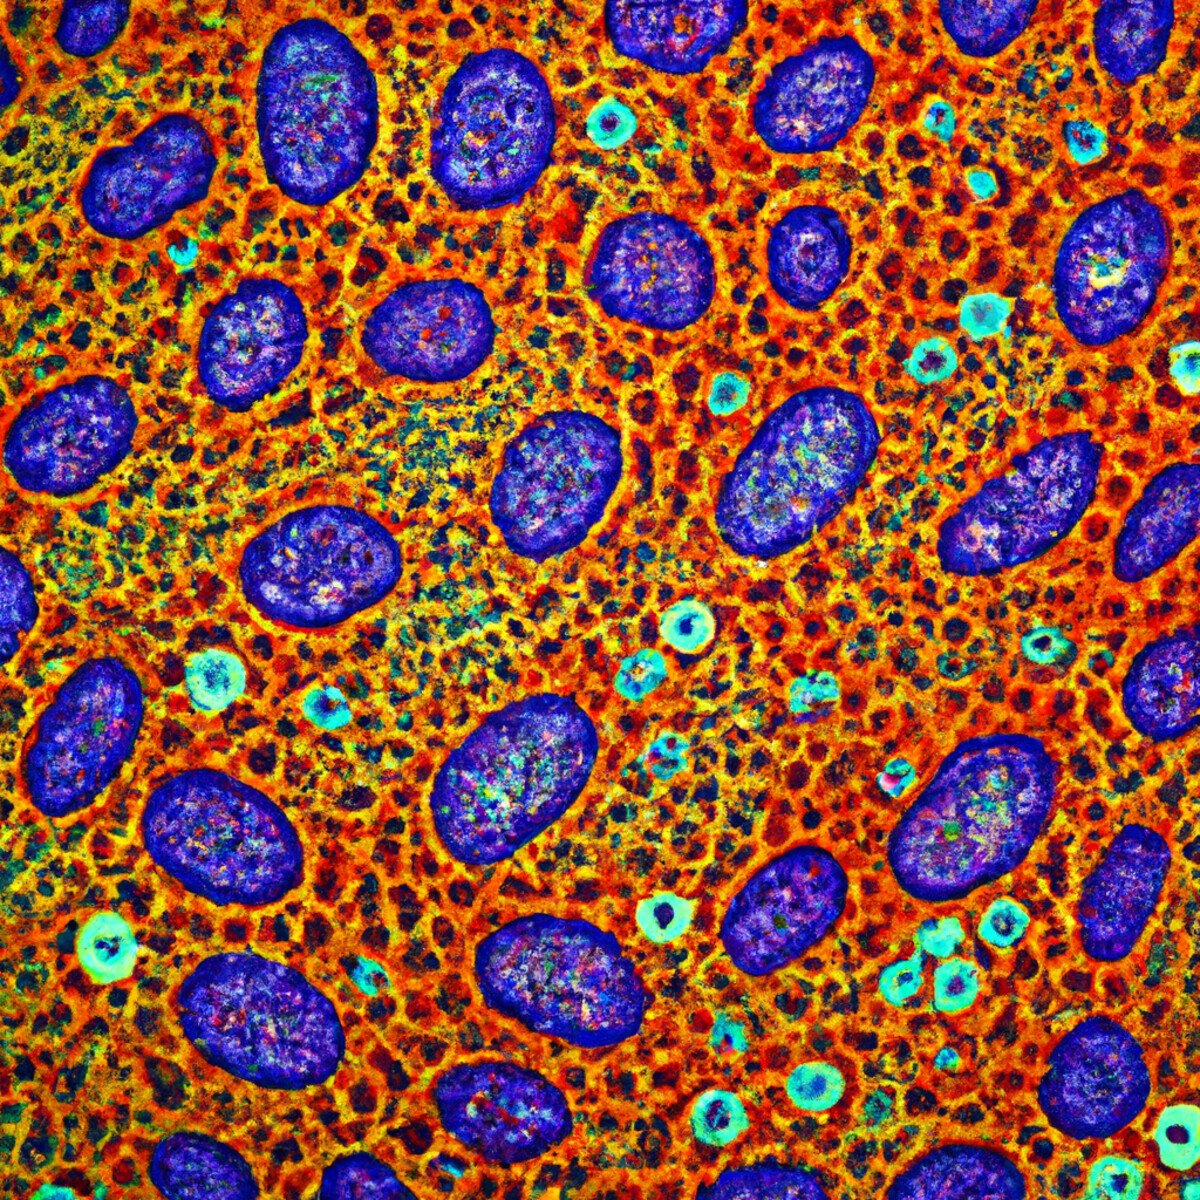 Close-up of stained Langerhans cells on a microscope slide, surrounded by lab equipment, illustrating scientific research on Langerhans Cell Histiocytosis.